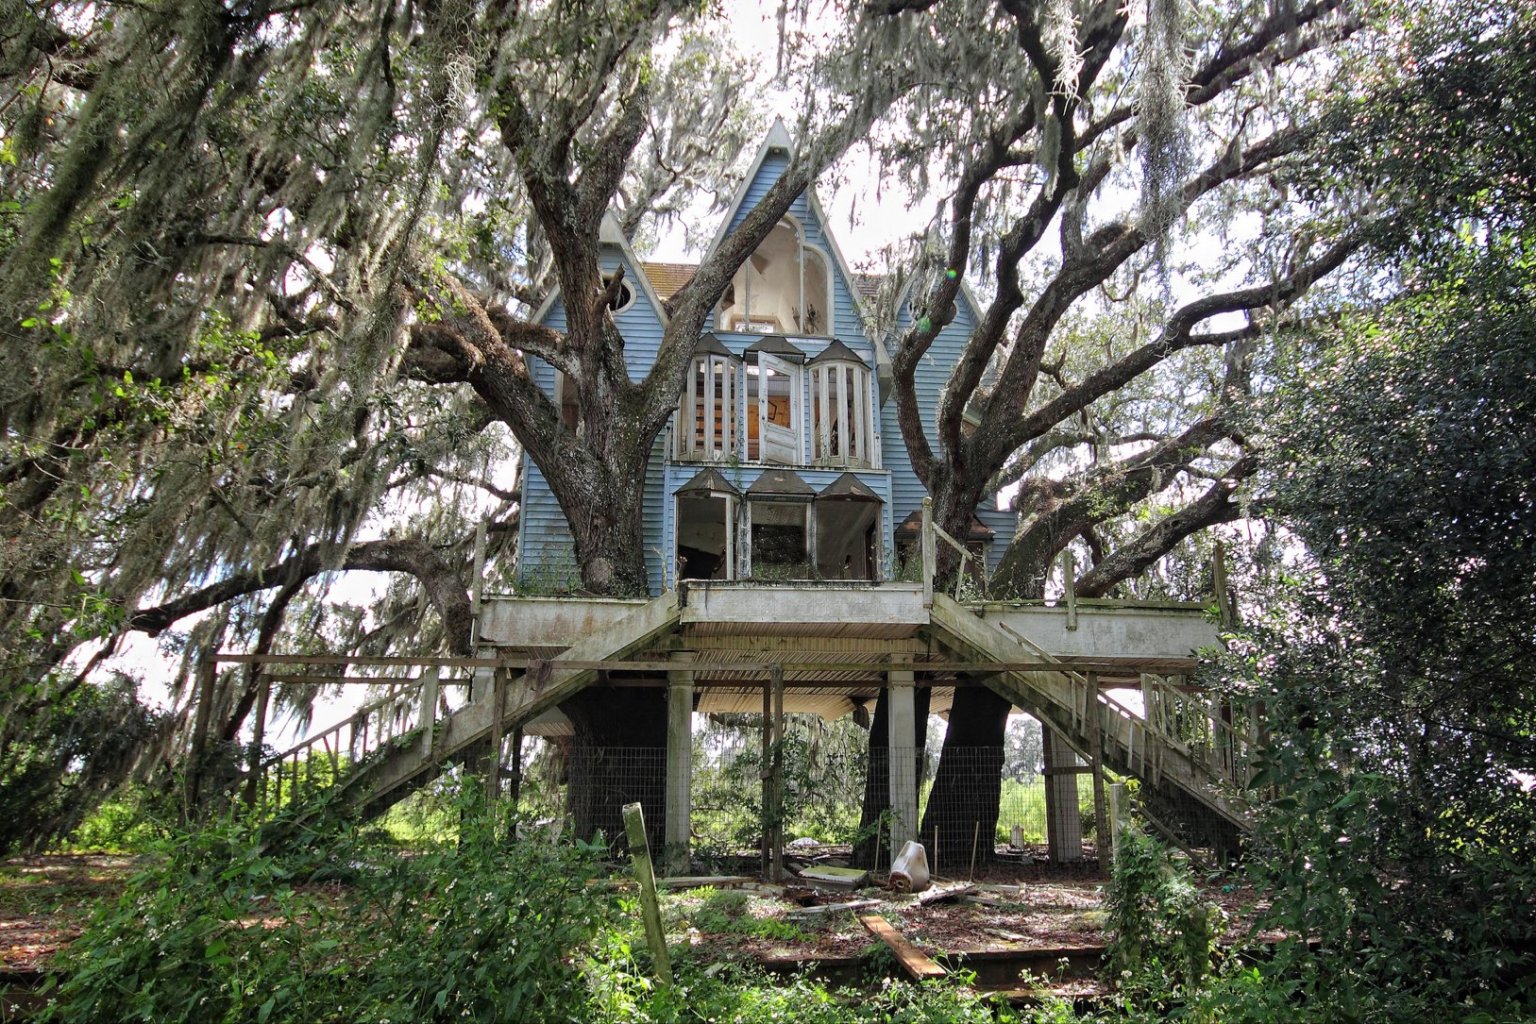 You Won't Be Able To Stop Looking At This Creepy Abandoned Treehouse